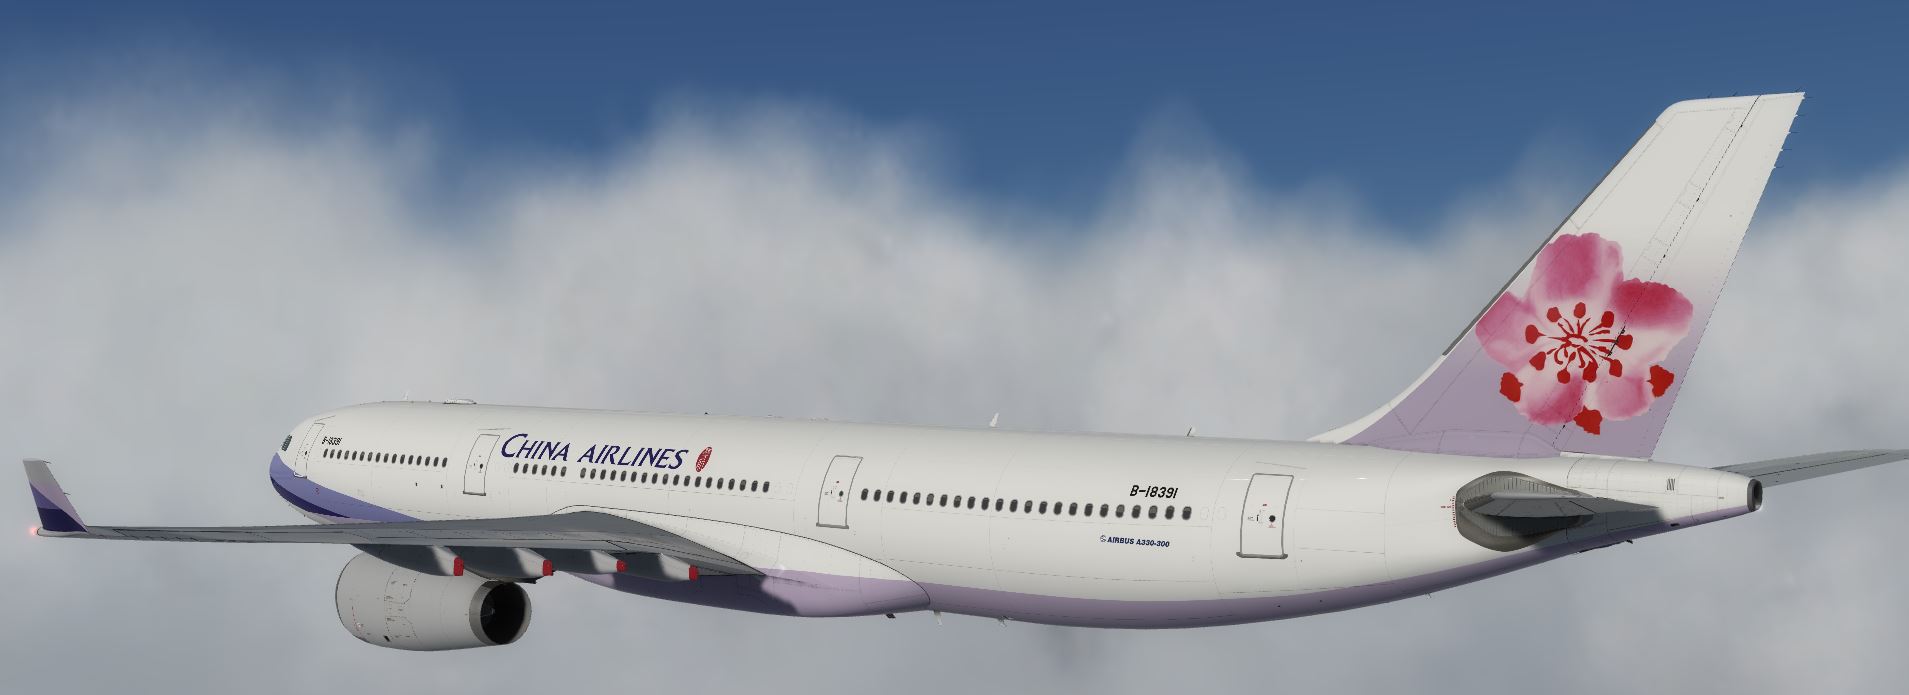 AS A330 ChinaAirline-4832 